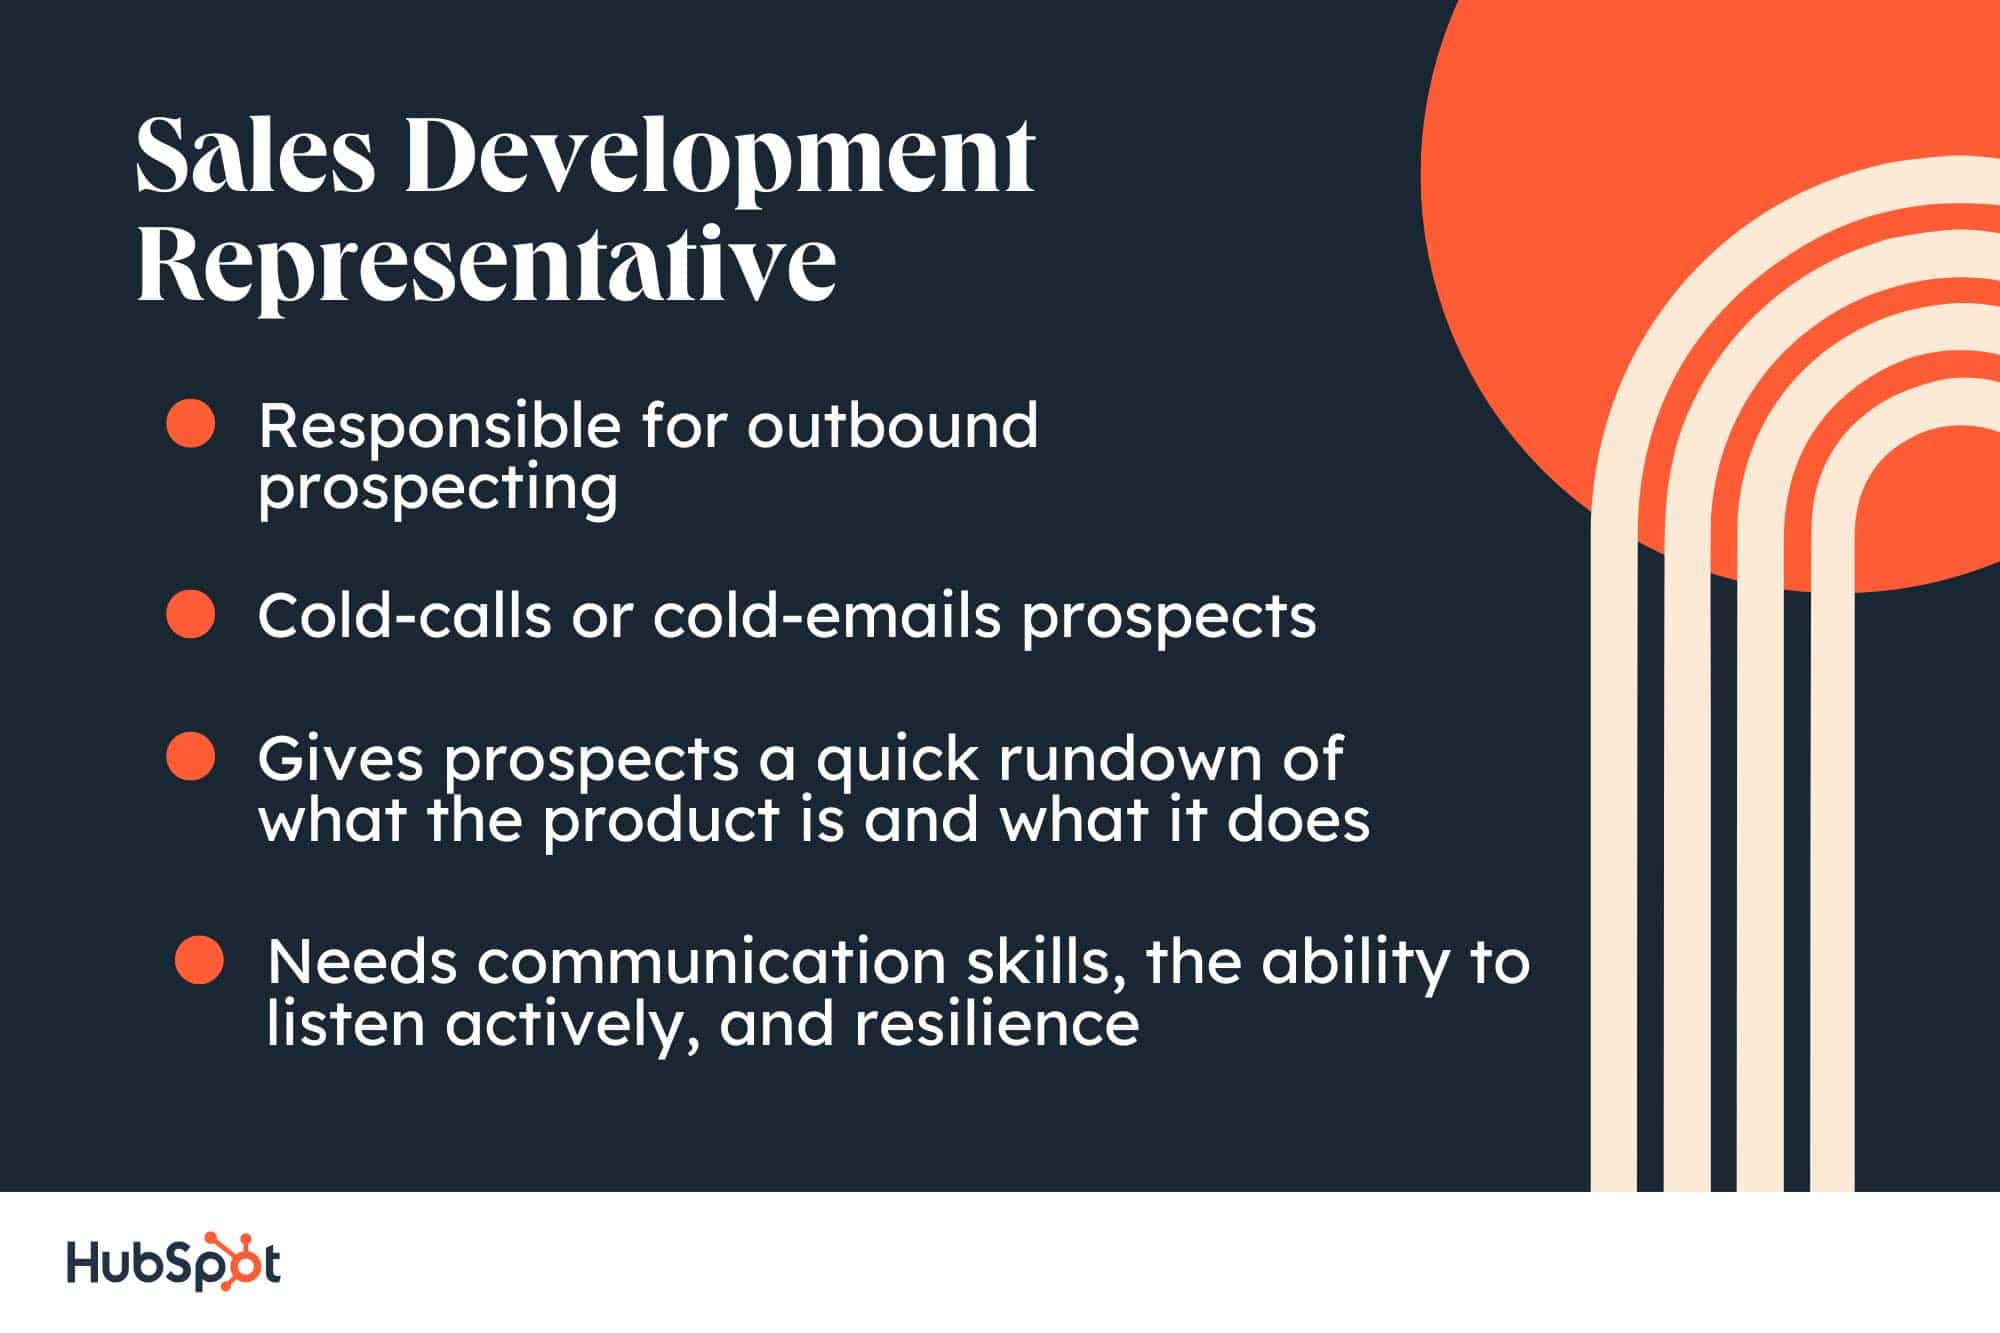 Sales Development Representative. Responsible for outbound prospecting. Cold-calls or cold-emails prospects. Gives prospects a quick rundown of what the product is and what it does. Needs communication skills, the ability to listen actively, and resilience.